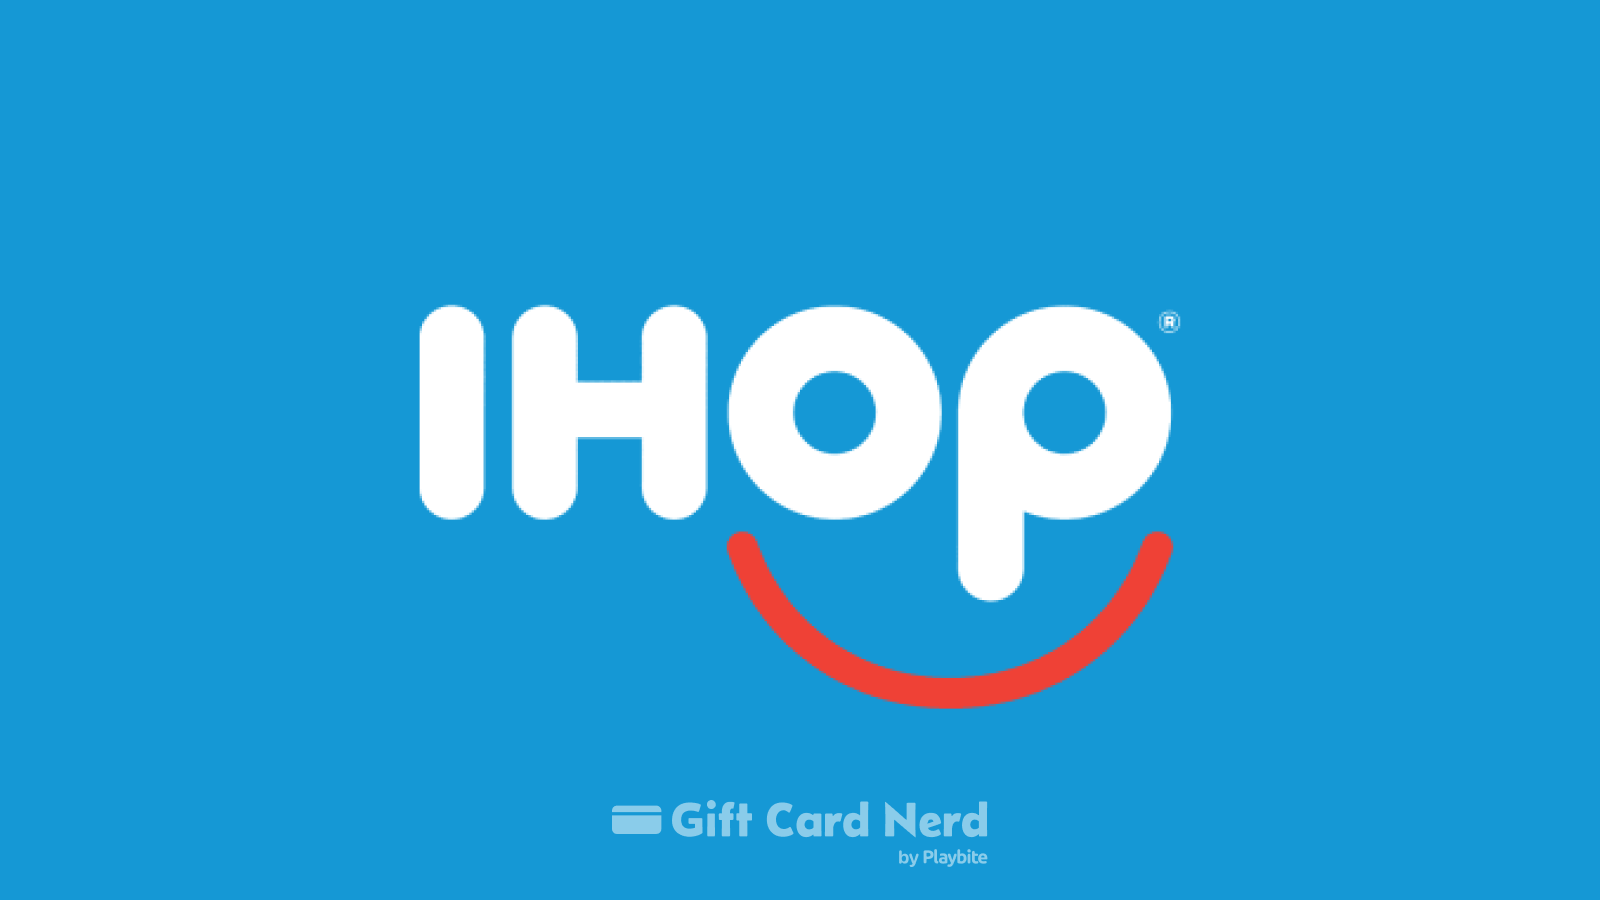 Can I Use an IHOP Gift Card on PayPal?